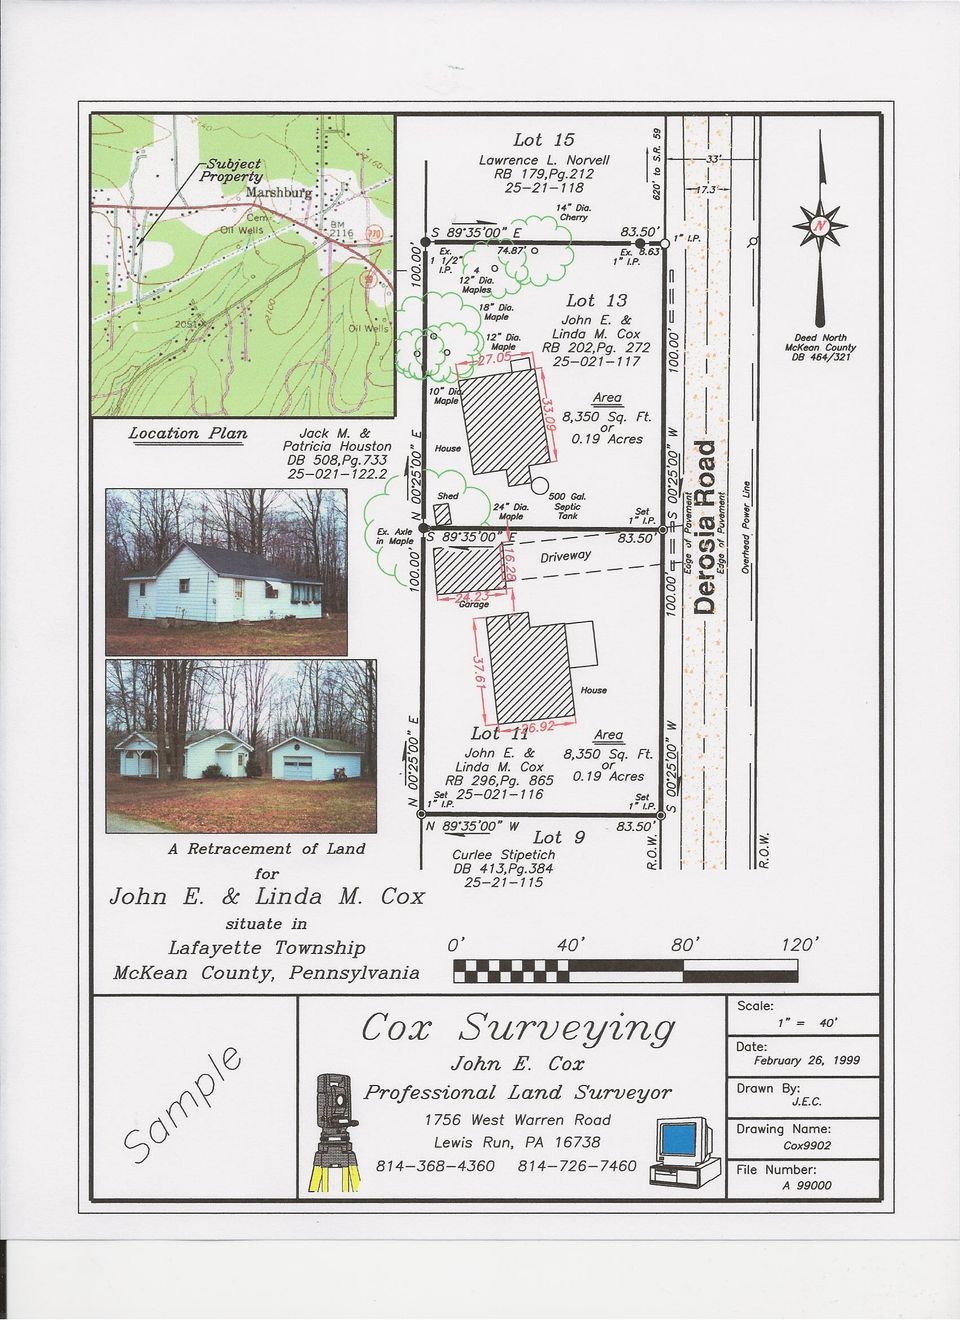 Final Survey Map - Cox Surveying in Lewis Run, PA.